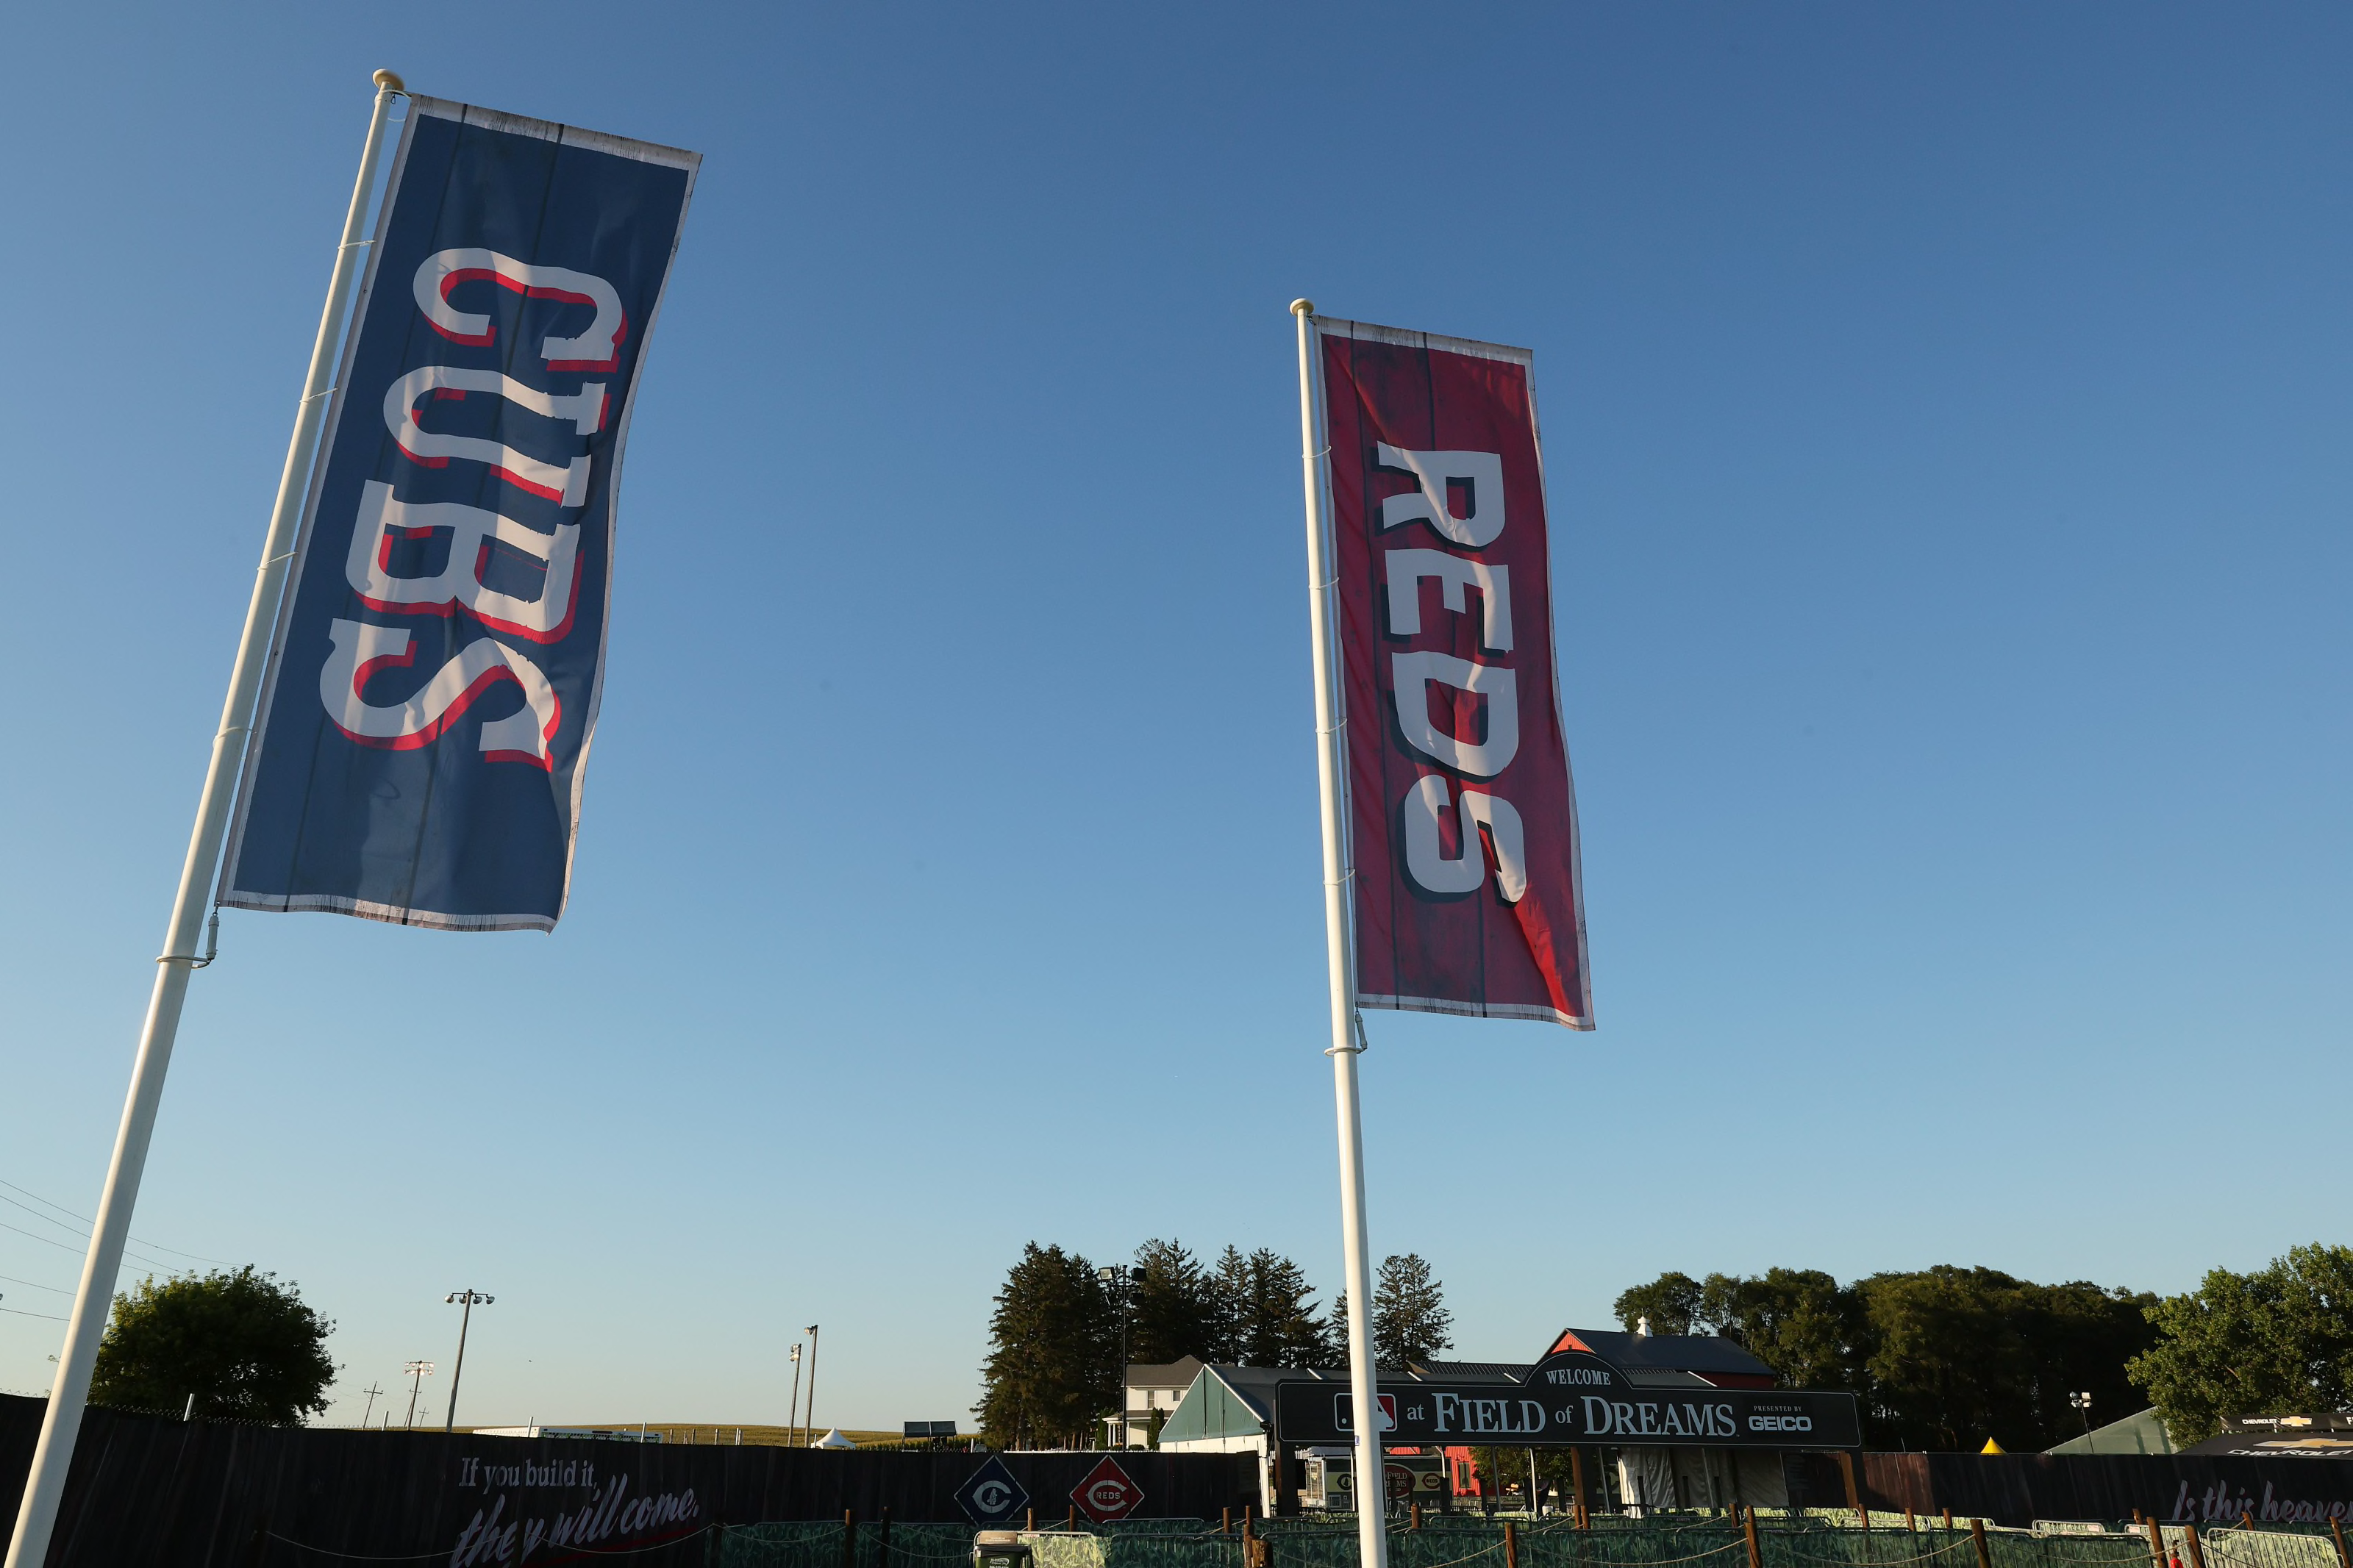 A general view of the pre-game signage at the Field of Dreams between the Cincinnati Reds and the Chicago Cubs